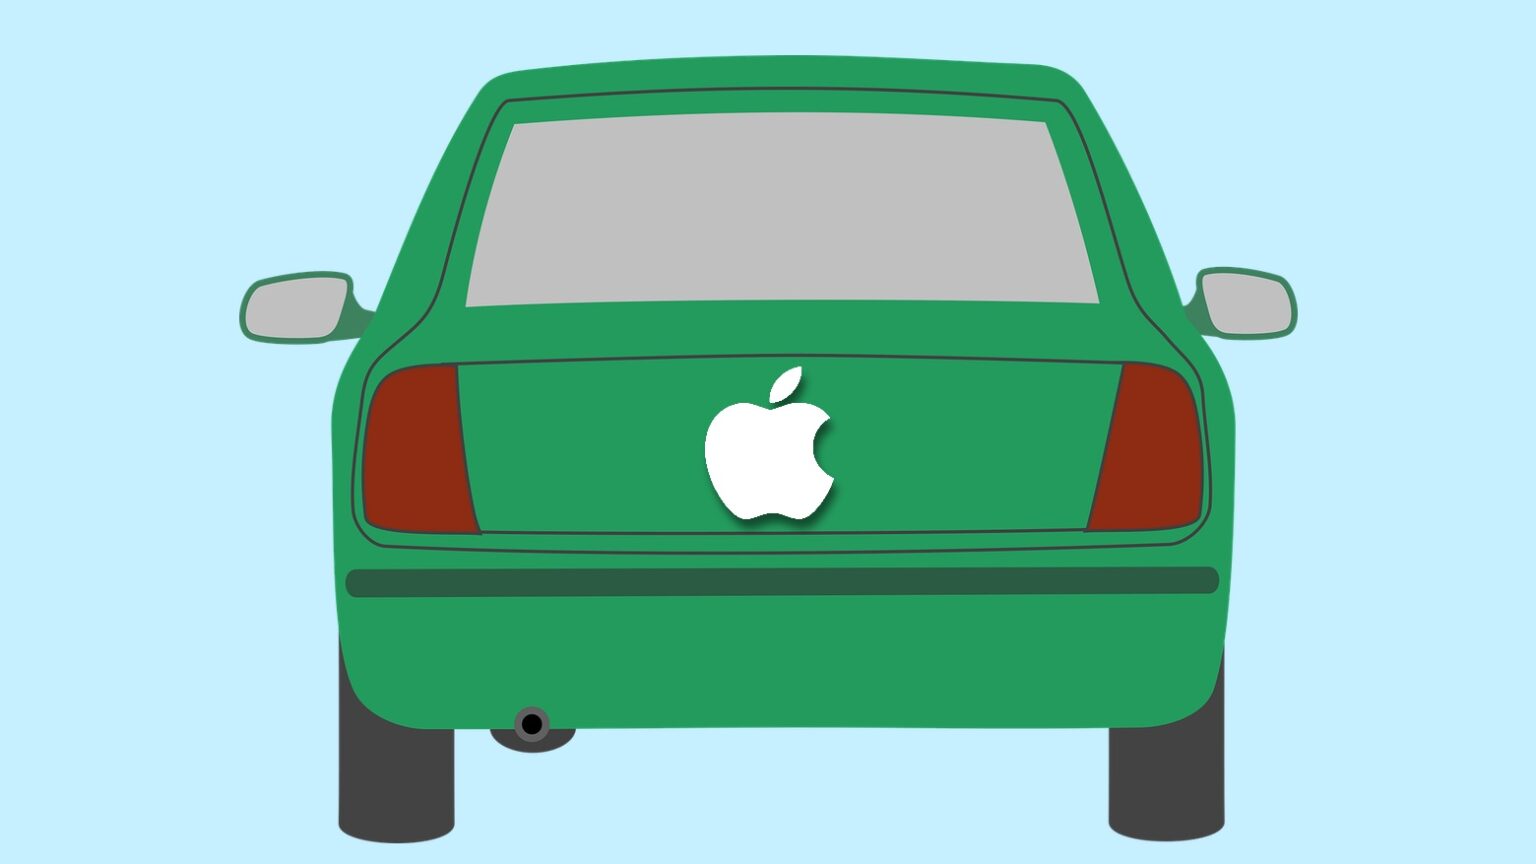 An Apple Car is supposedly in development, though it probably won‘t look anything like this.